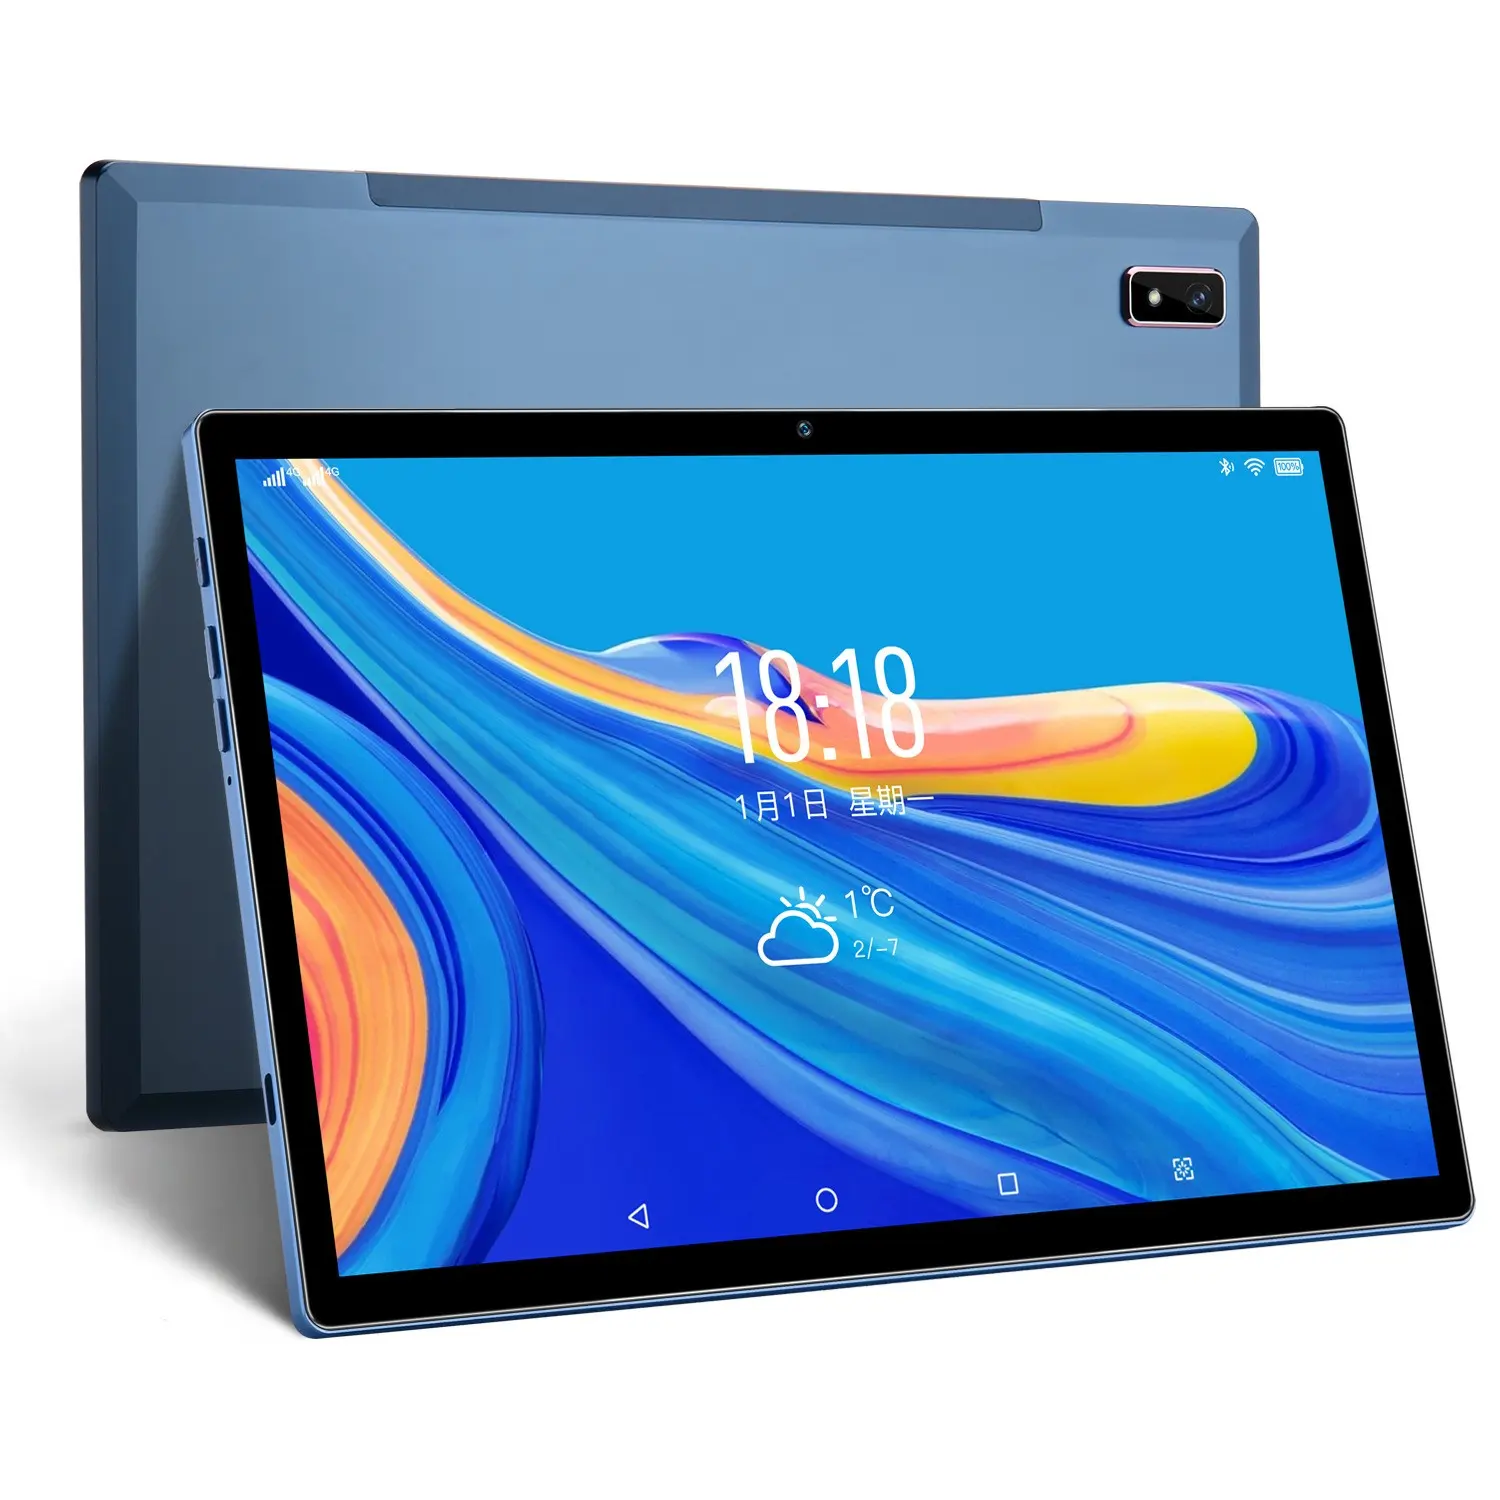 Tablet 10.1 pollici Octa Core 4gb Ram 64gb Rom Android 9.0 Tablet Pc da 10.1 pollici 4g Lte 1920*1280 Ips Dual camera 3g Sim Tablet